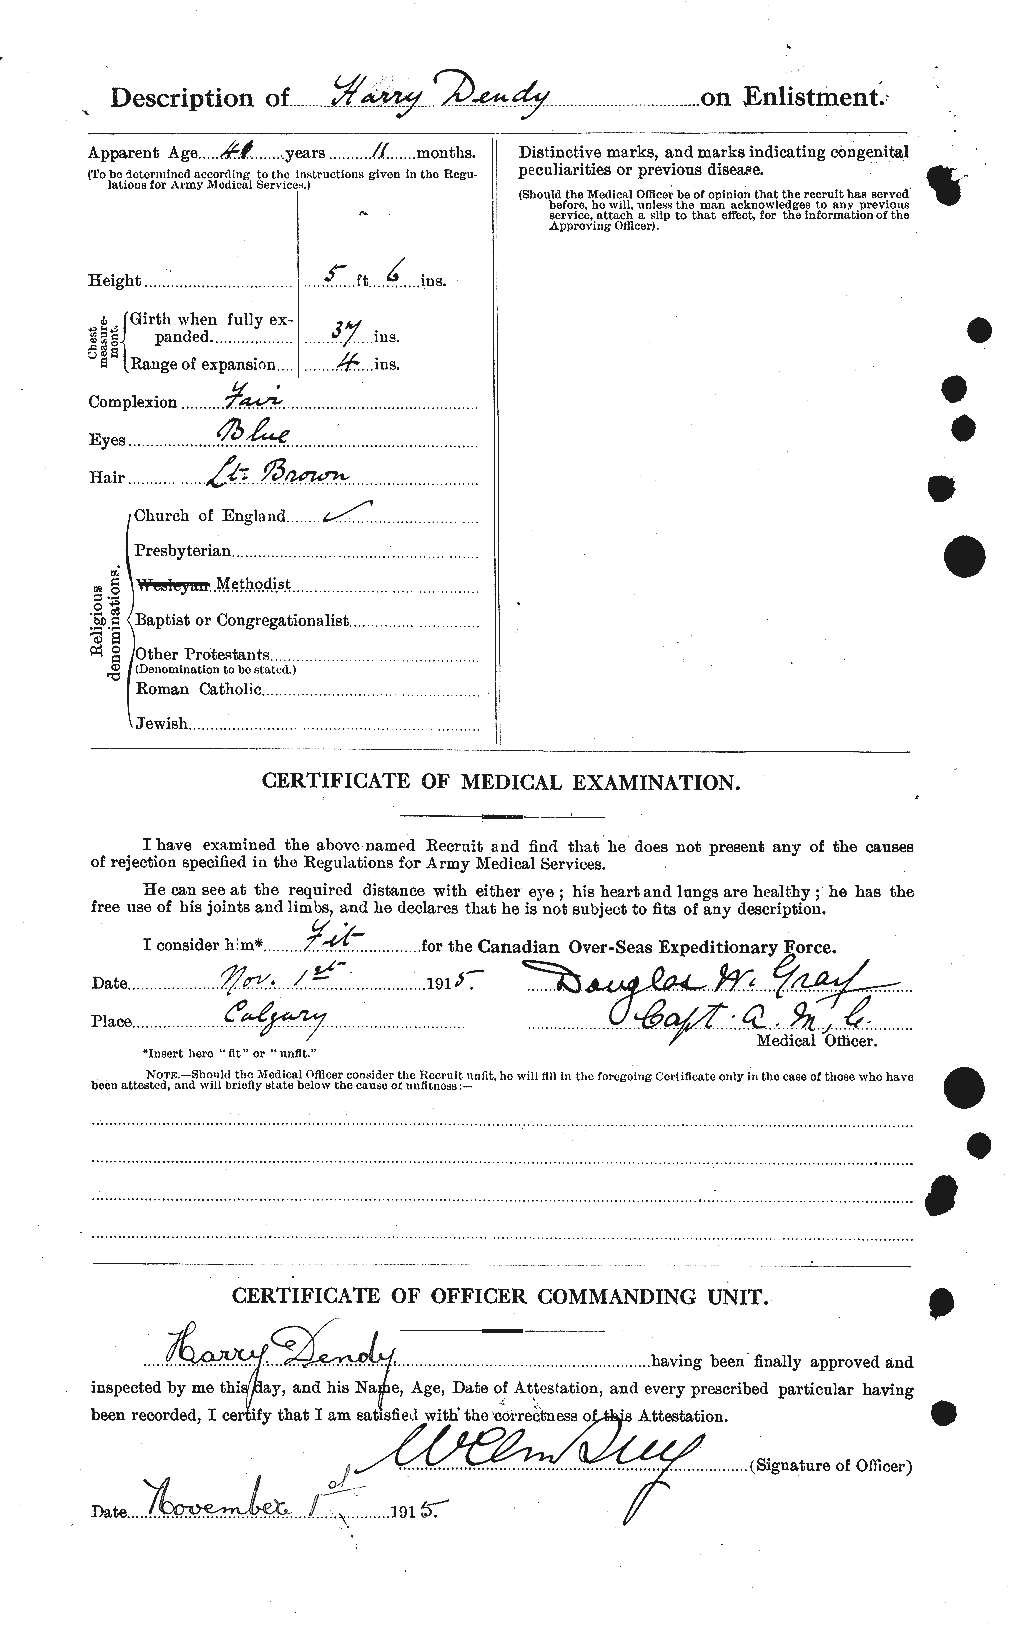 Personnel Records of the First World War - CEF 287870b